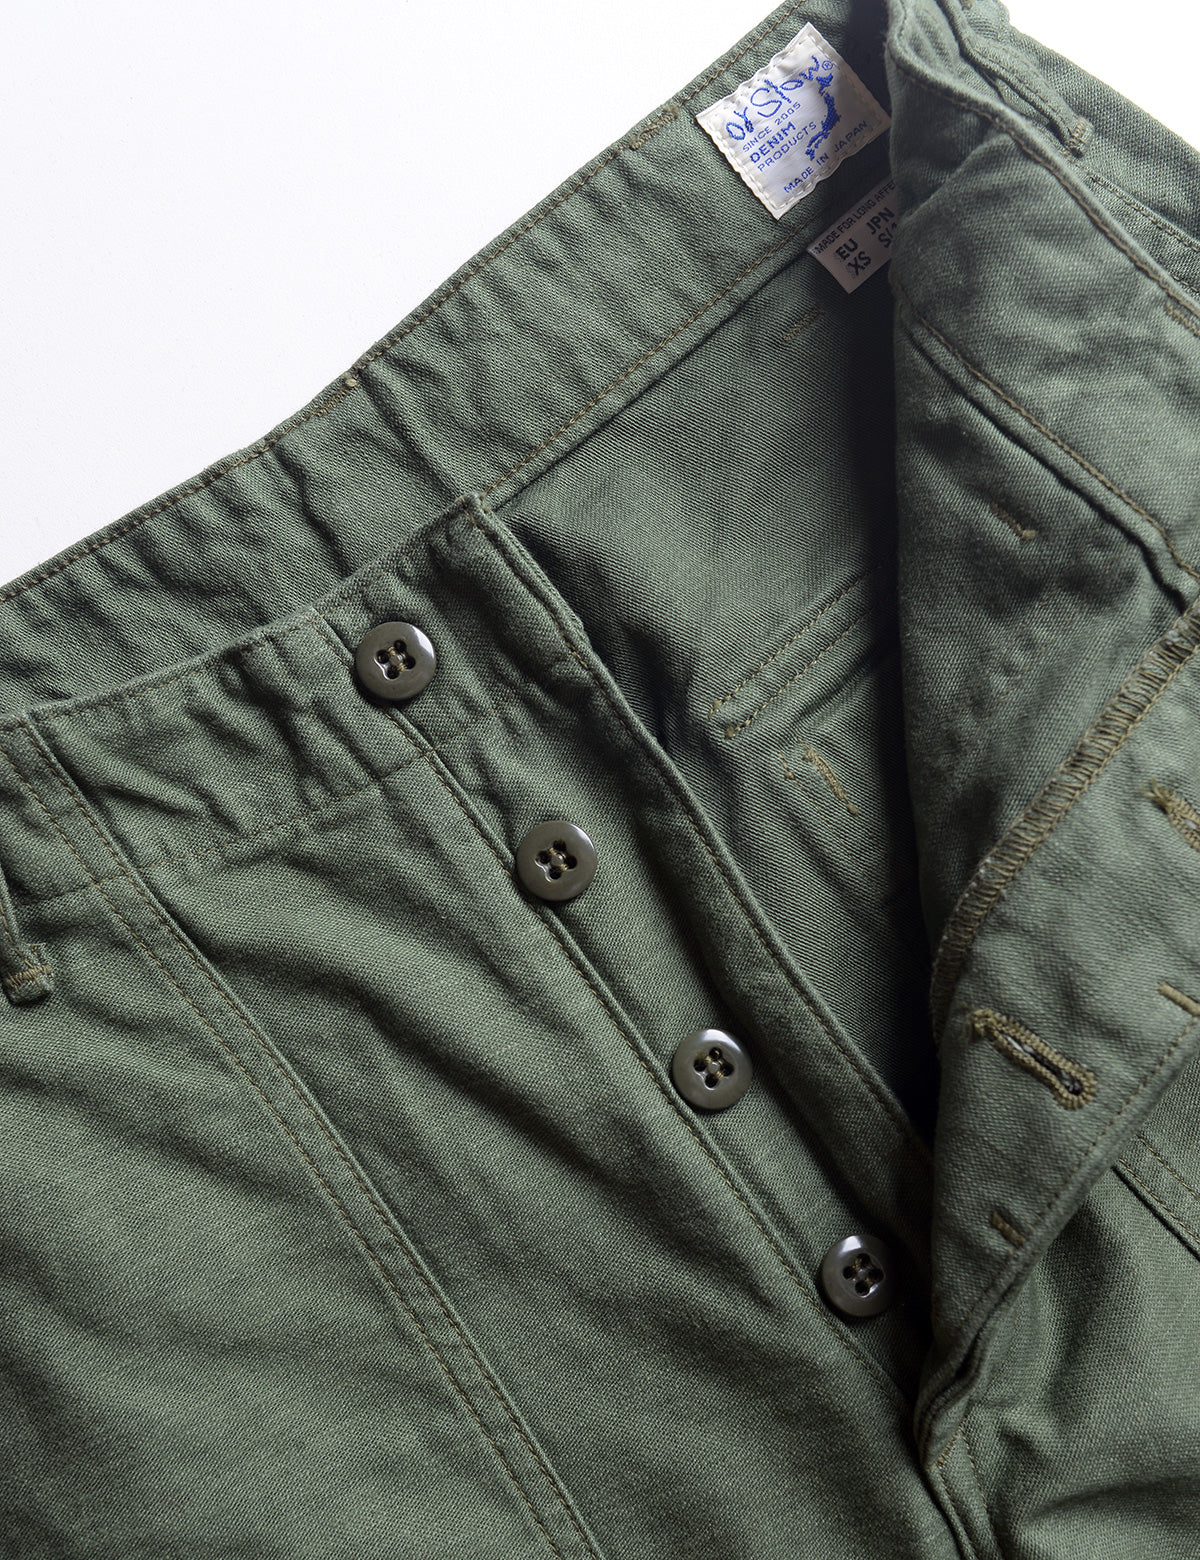 Unbuttoned fly detail on Orslow US Army Fatigue Trousers - Army Green